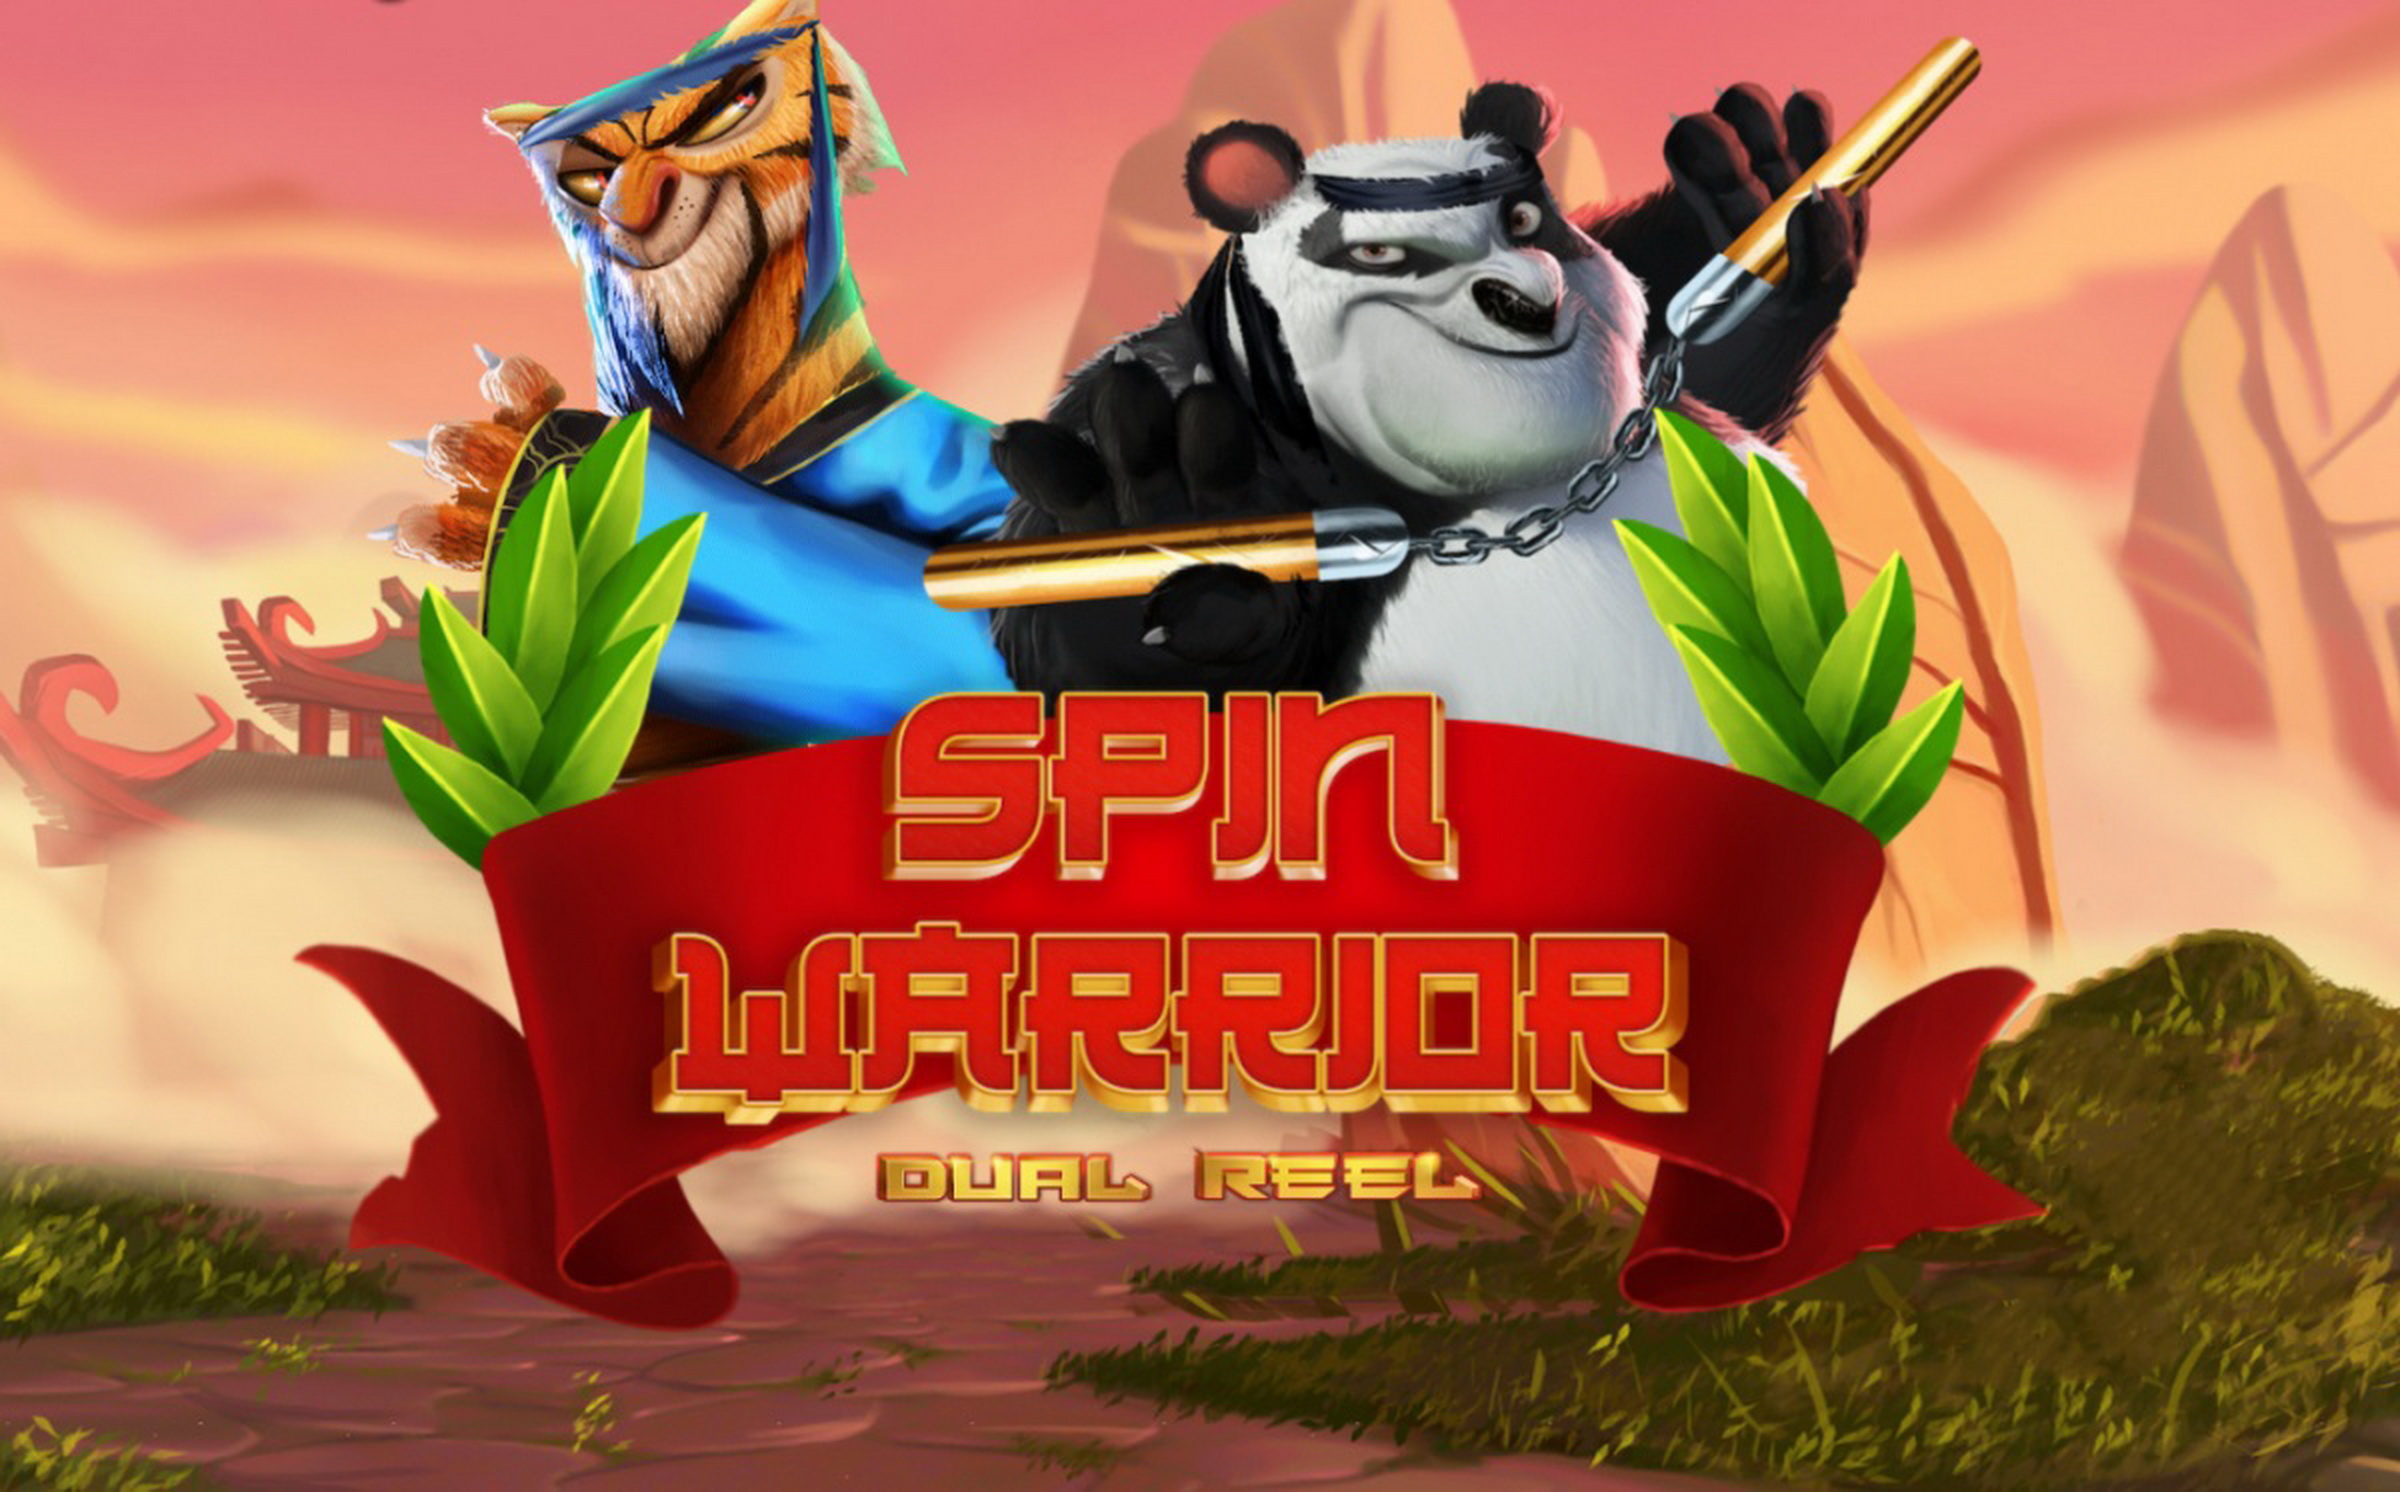 The Spin Warrior Online Slot Demo Game by Boomerang Studios